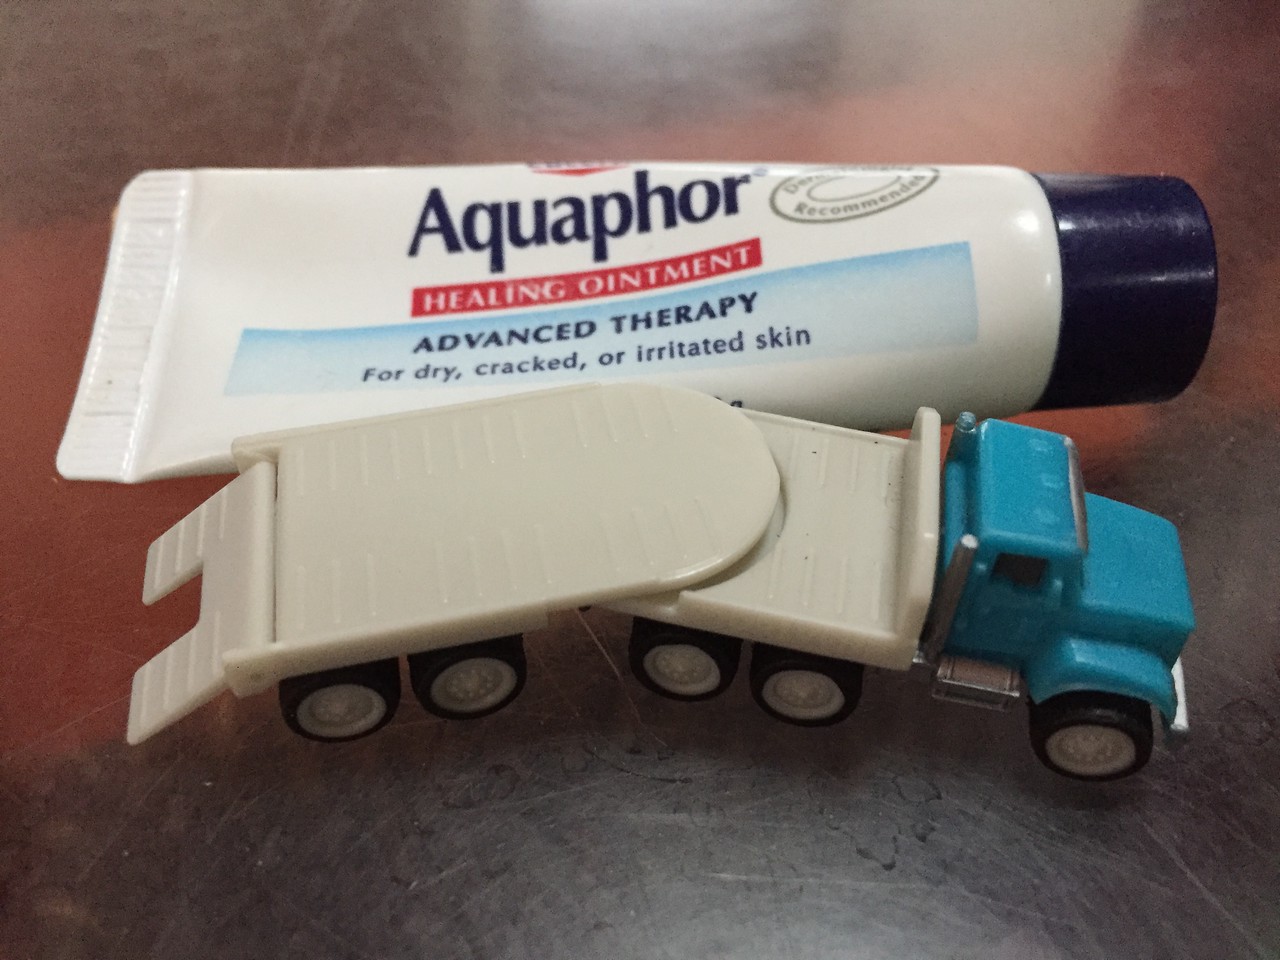 Aquaphor tiny tube healing ointment by Eucerin next to Driven pocket series flatbed truck vehicle toy